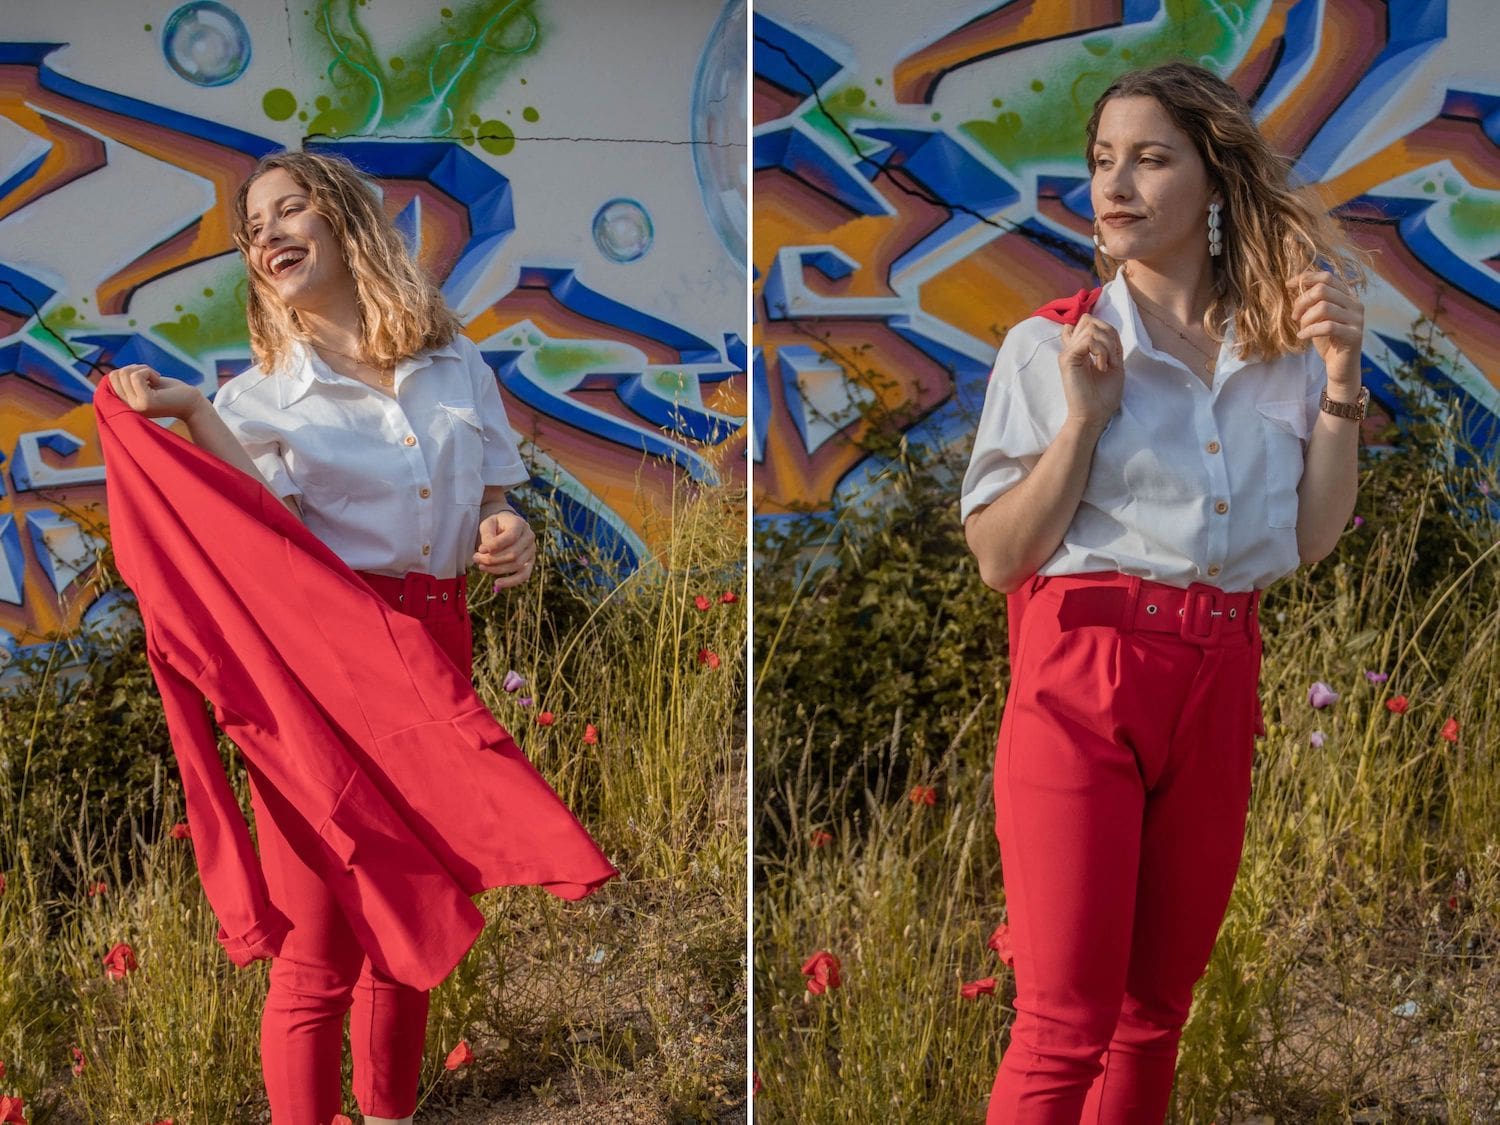 Comment porter le tailleur rouge boohoo ? - happinesscoco.com